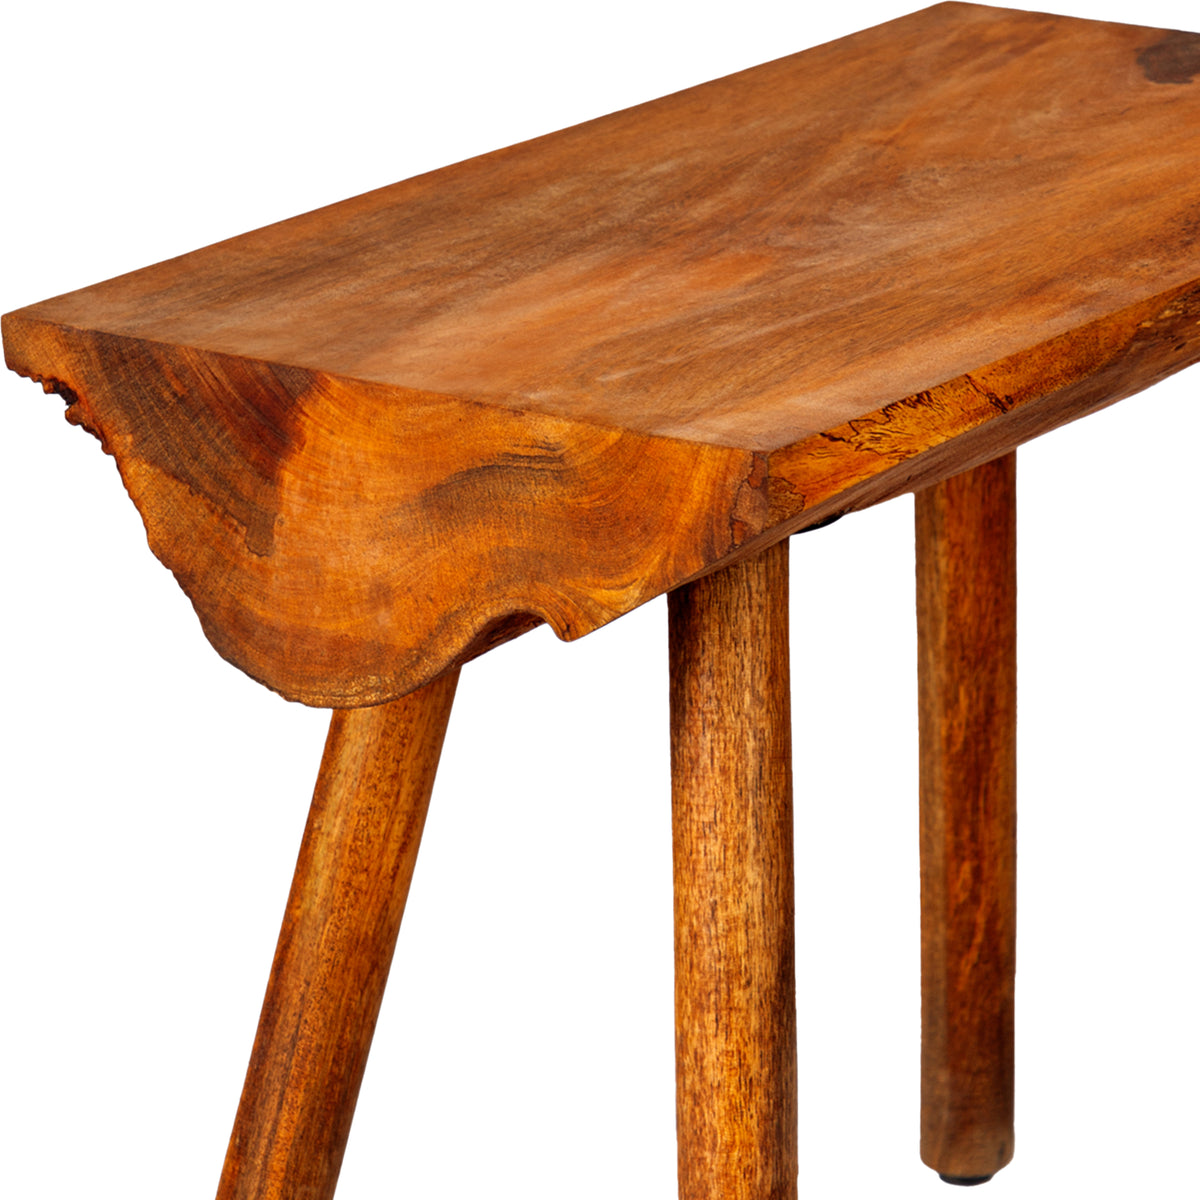 18 Inch Rectangular Mango Wood Accent Side Table with Live Edge Log Top, Warm Brown - UPT-272014